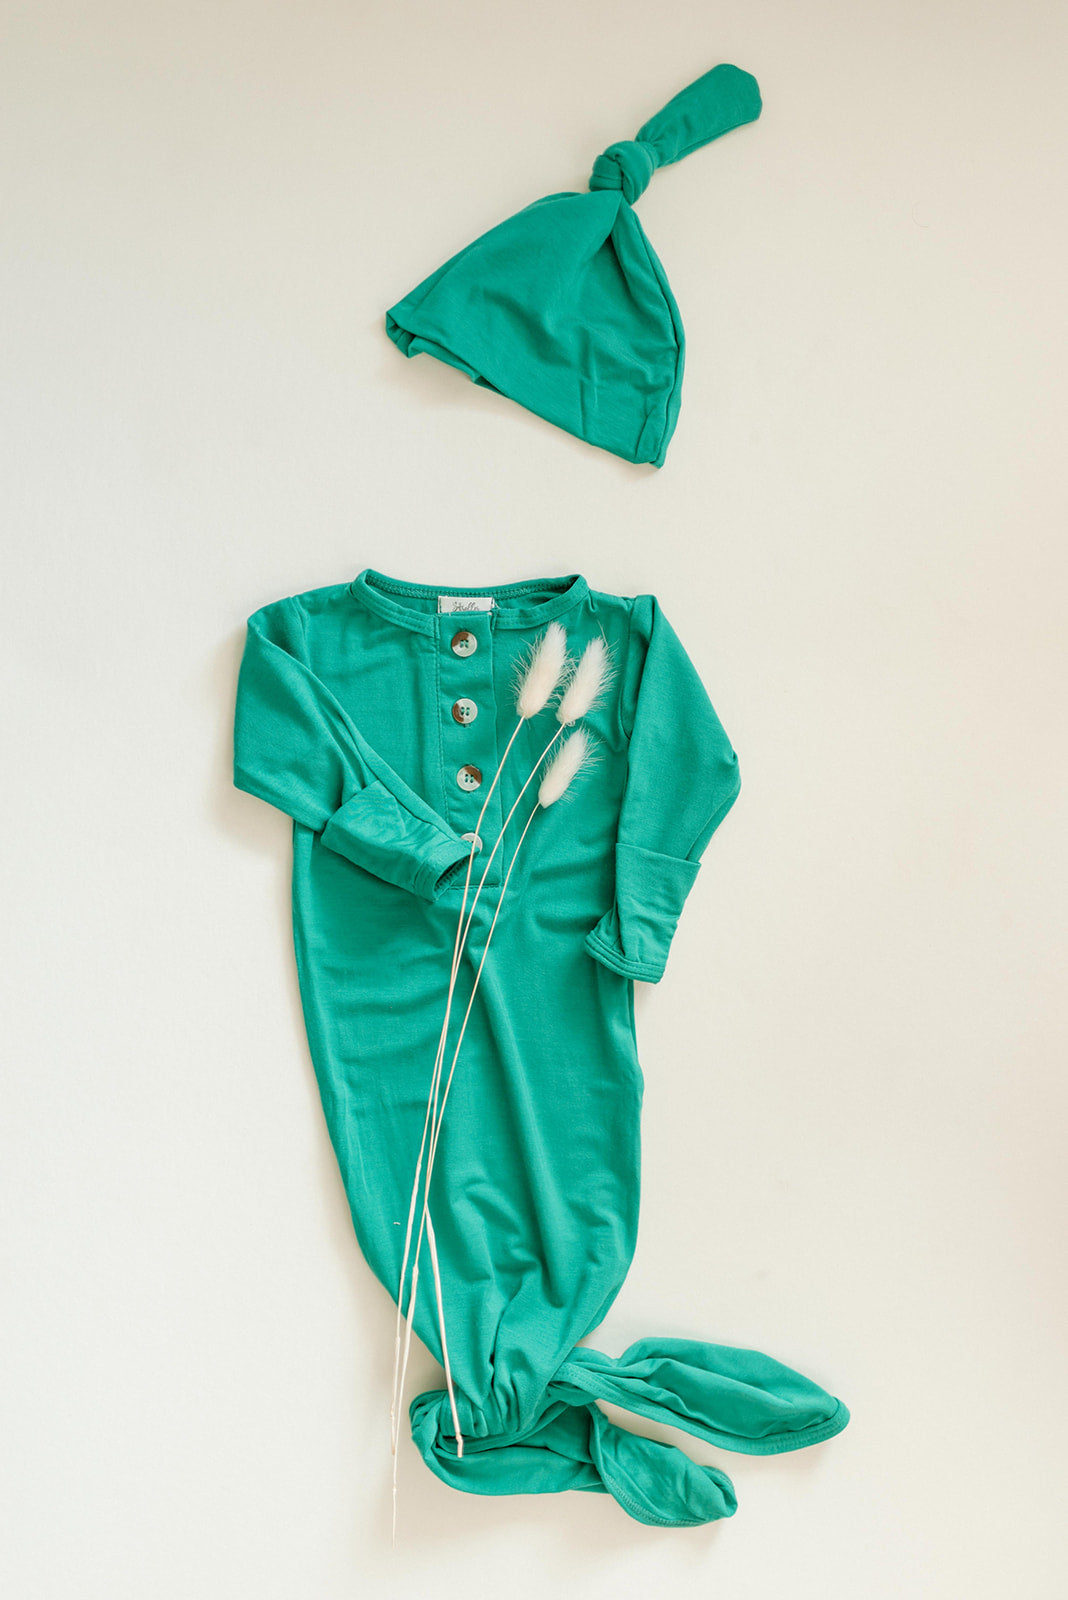 Knotted Baby Gown Set - Holiday Green (Newborn-3 months)